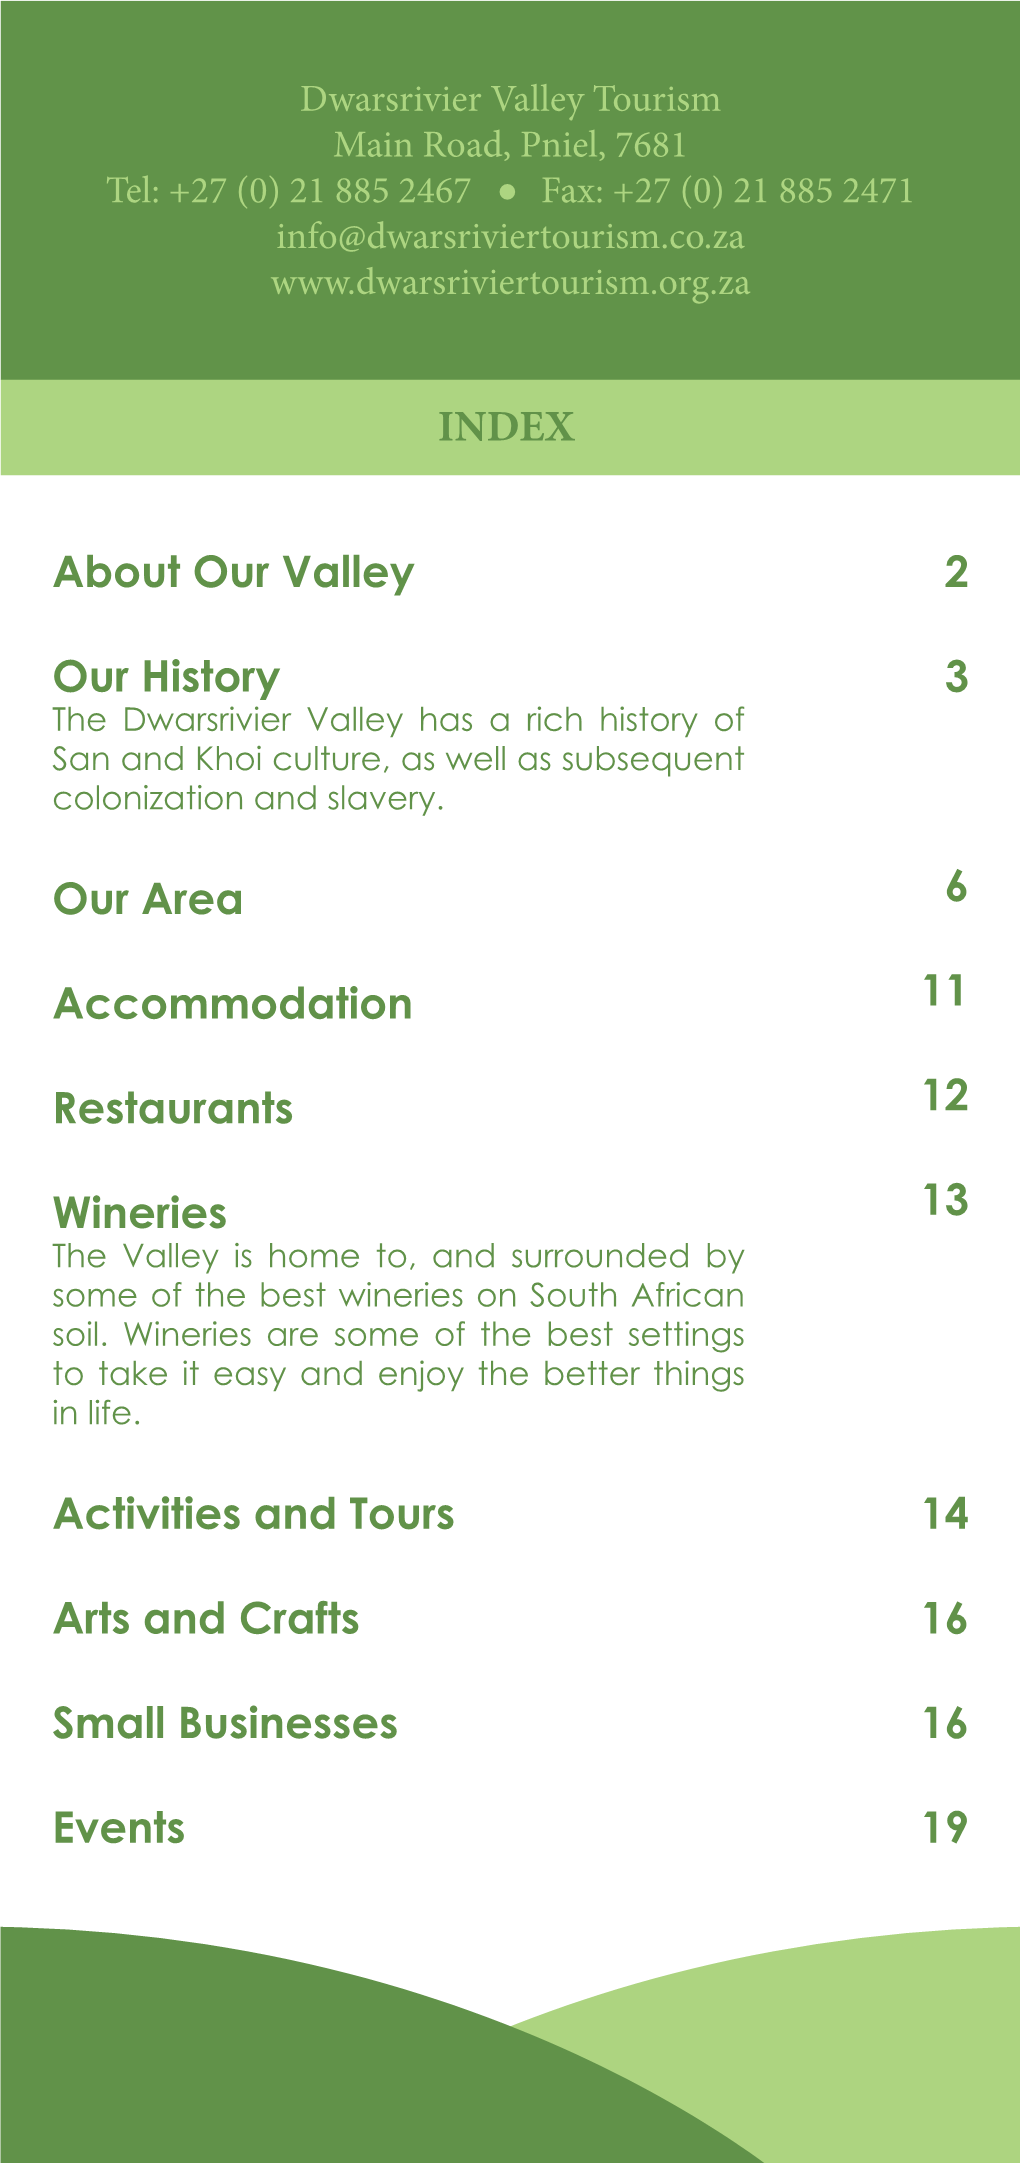 About Our Valley Our History Our Area Accommodation Restaurants